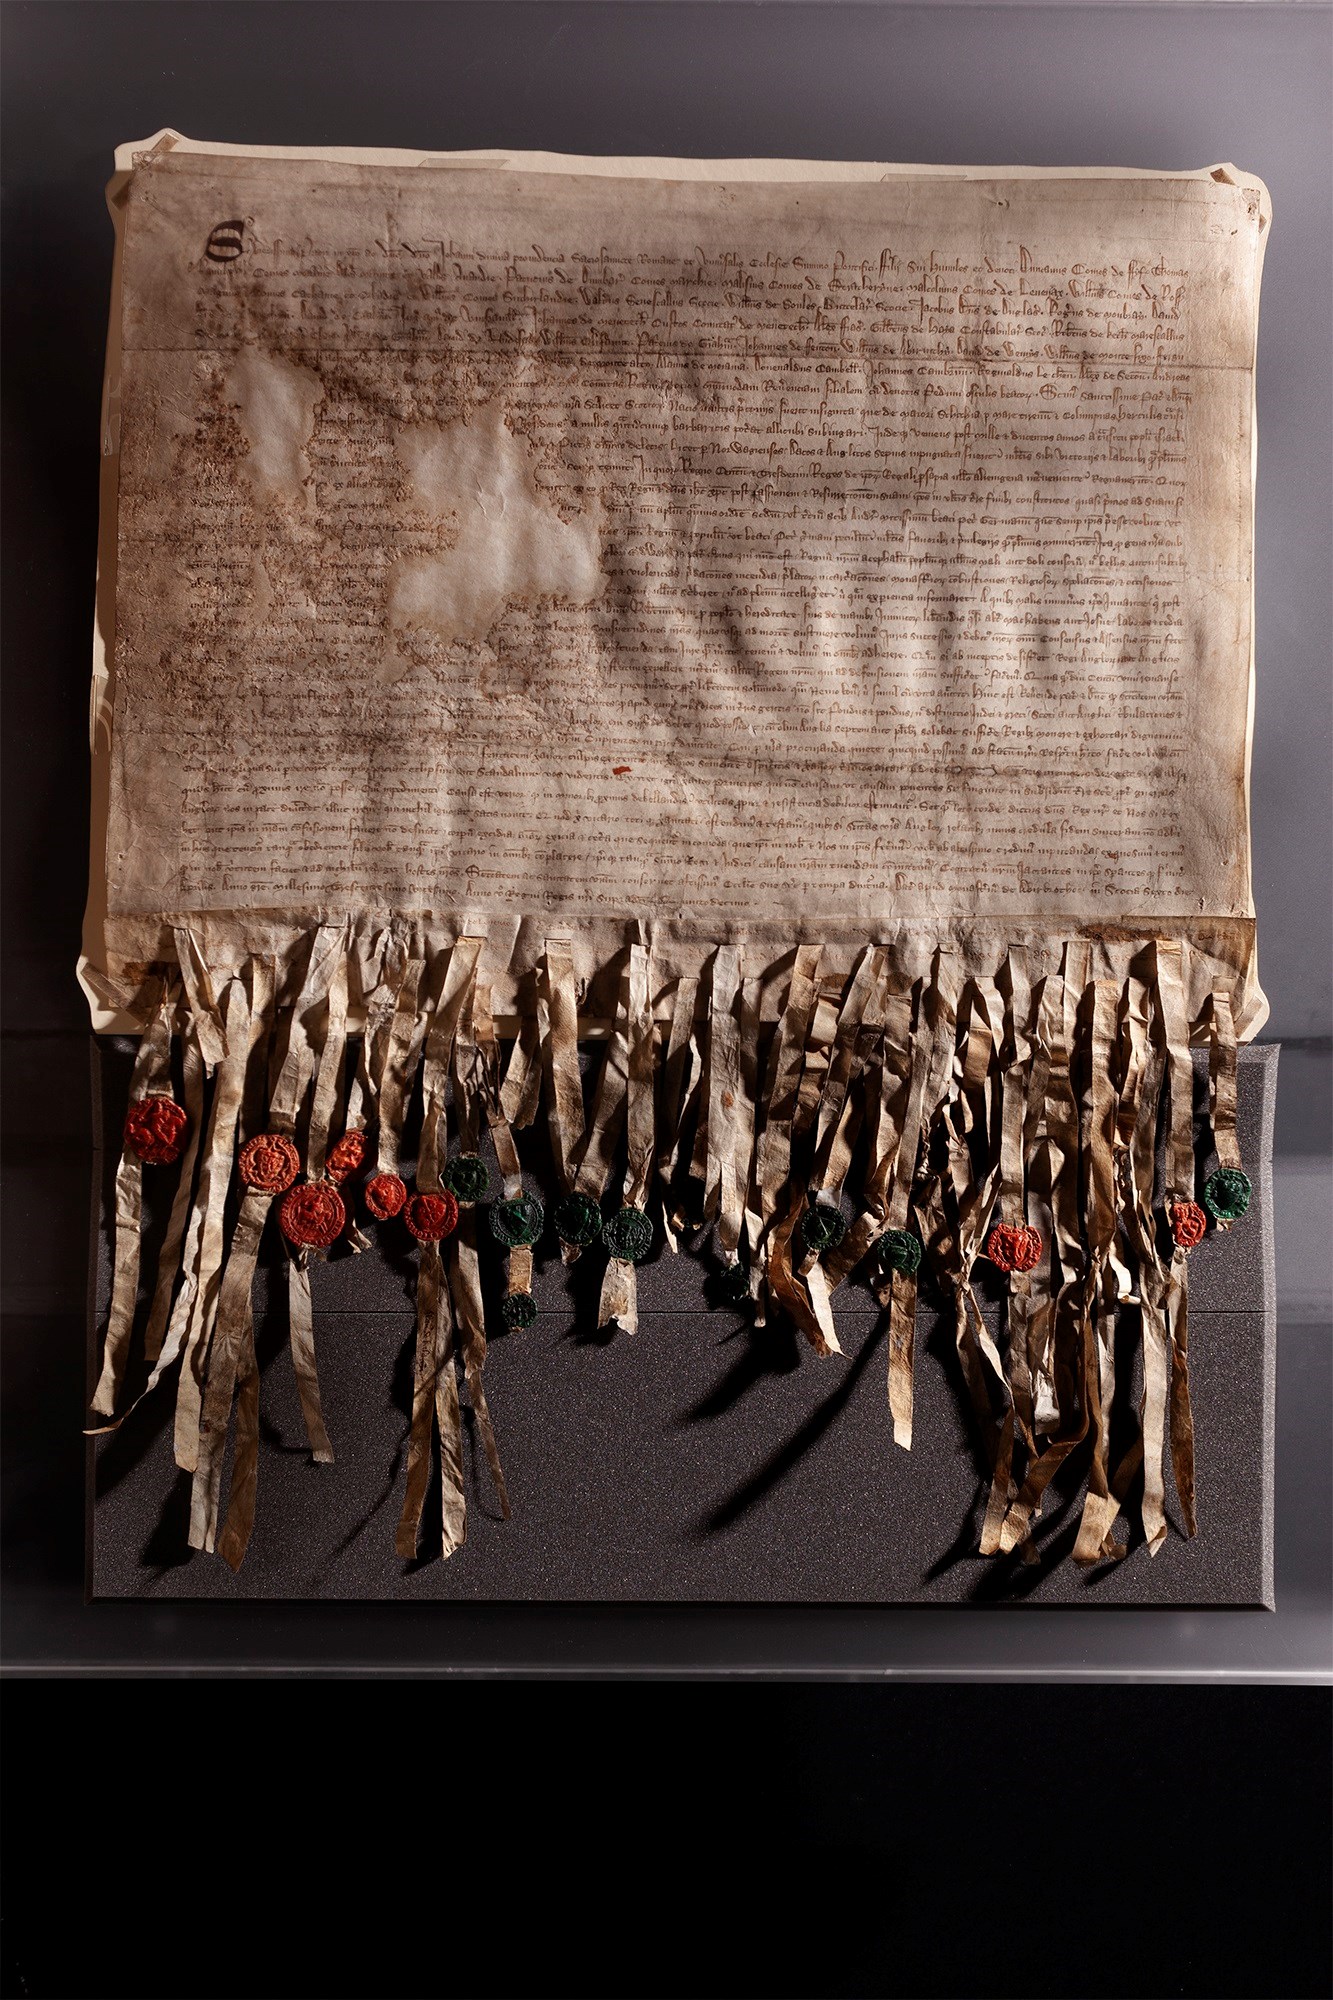 The Declaration of Arbroath laid out on a grey protective base. The Declaration has dense Latin script across it with two small patches missing, and many strips dangling from the bottom affixed with green and red wax seals.